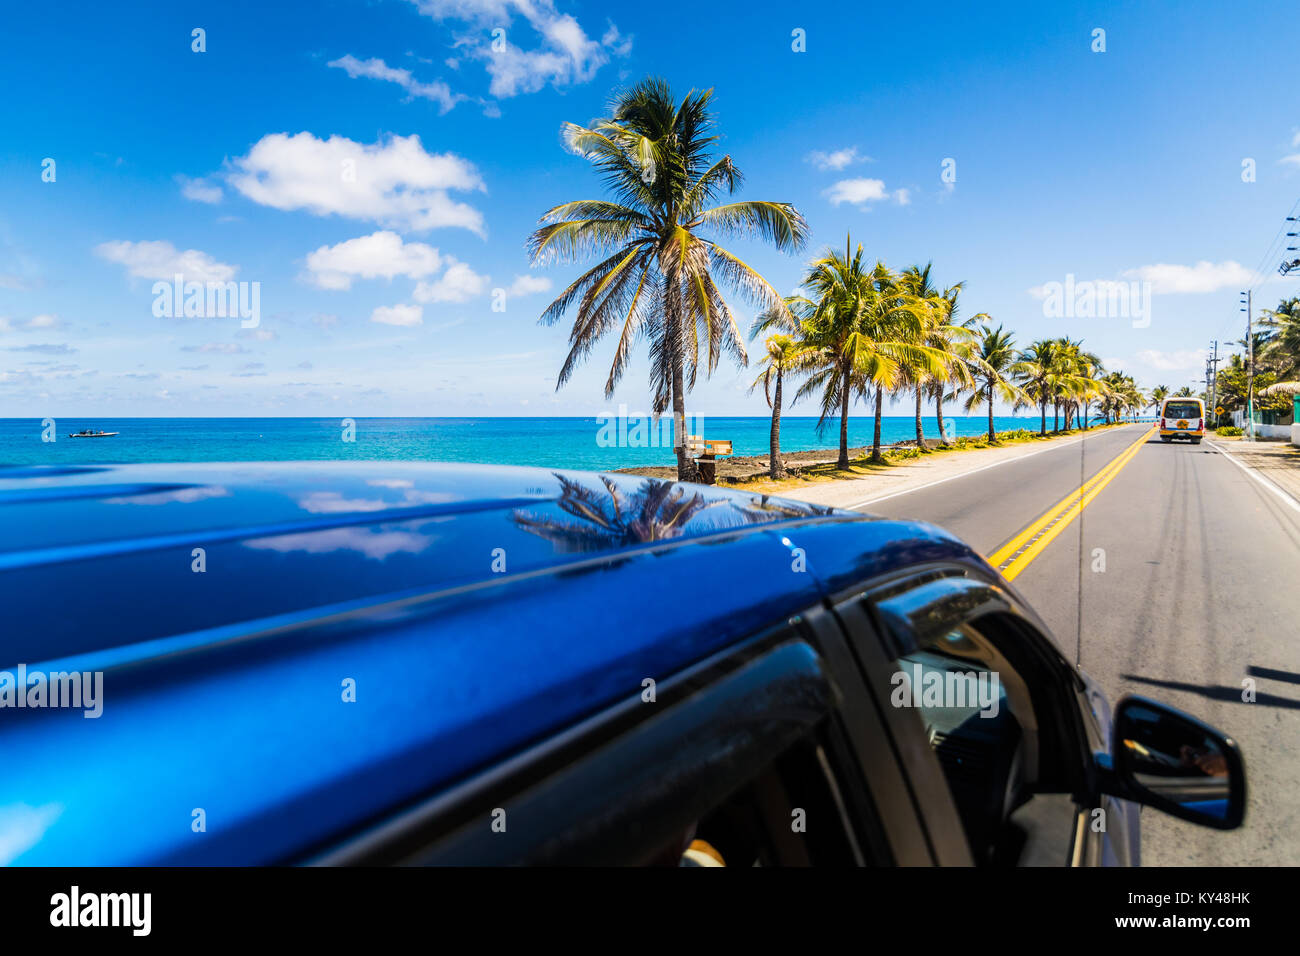 View to sunny street from above a car in Caribbean San-Andres island. Stock Photo